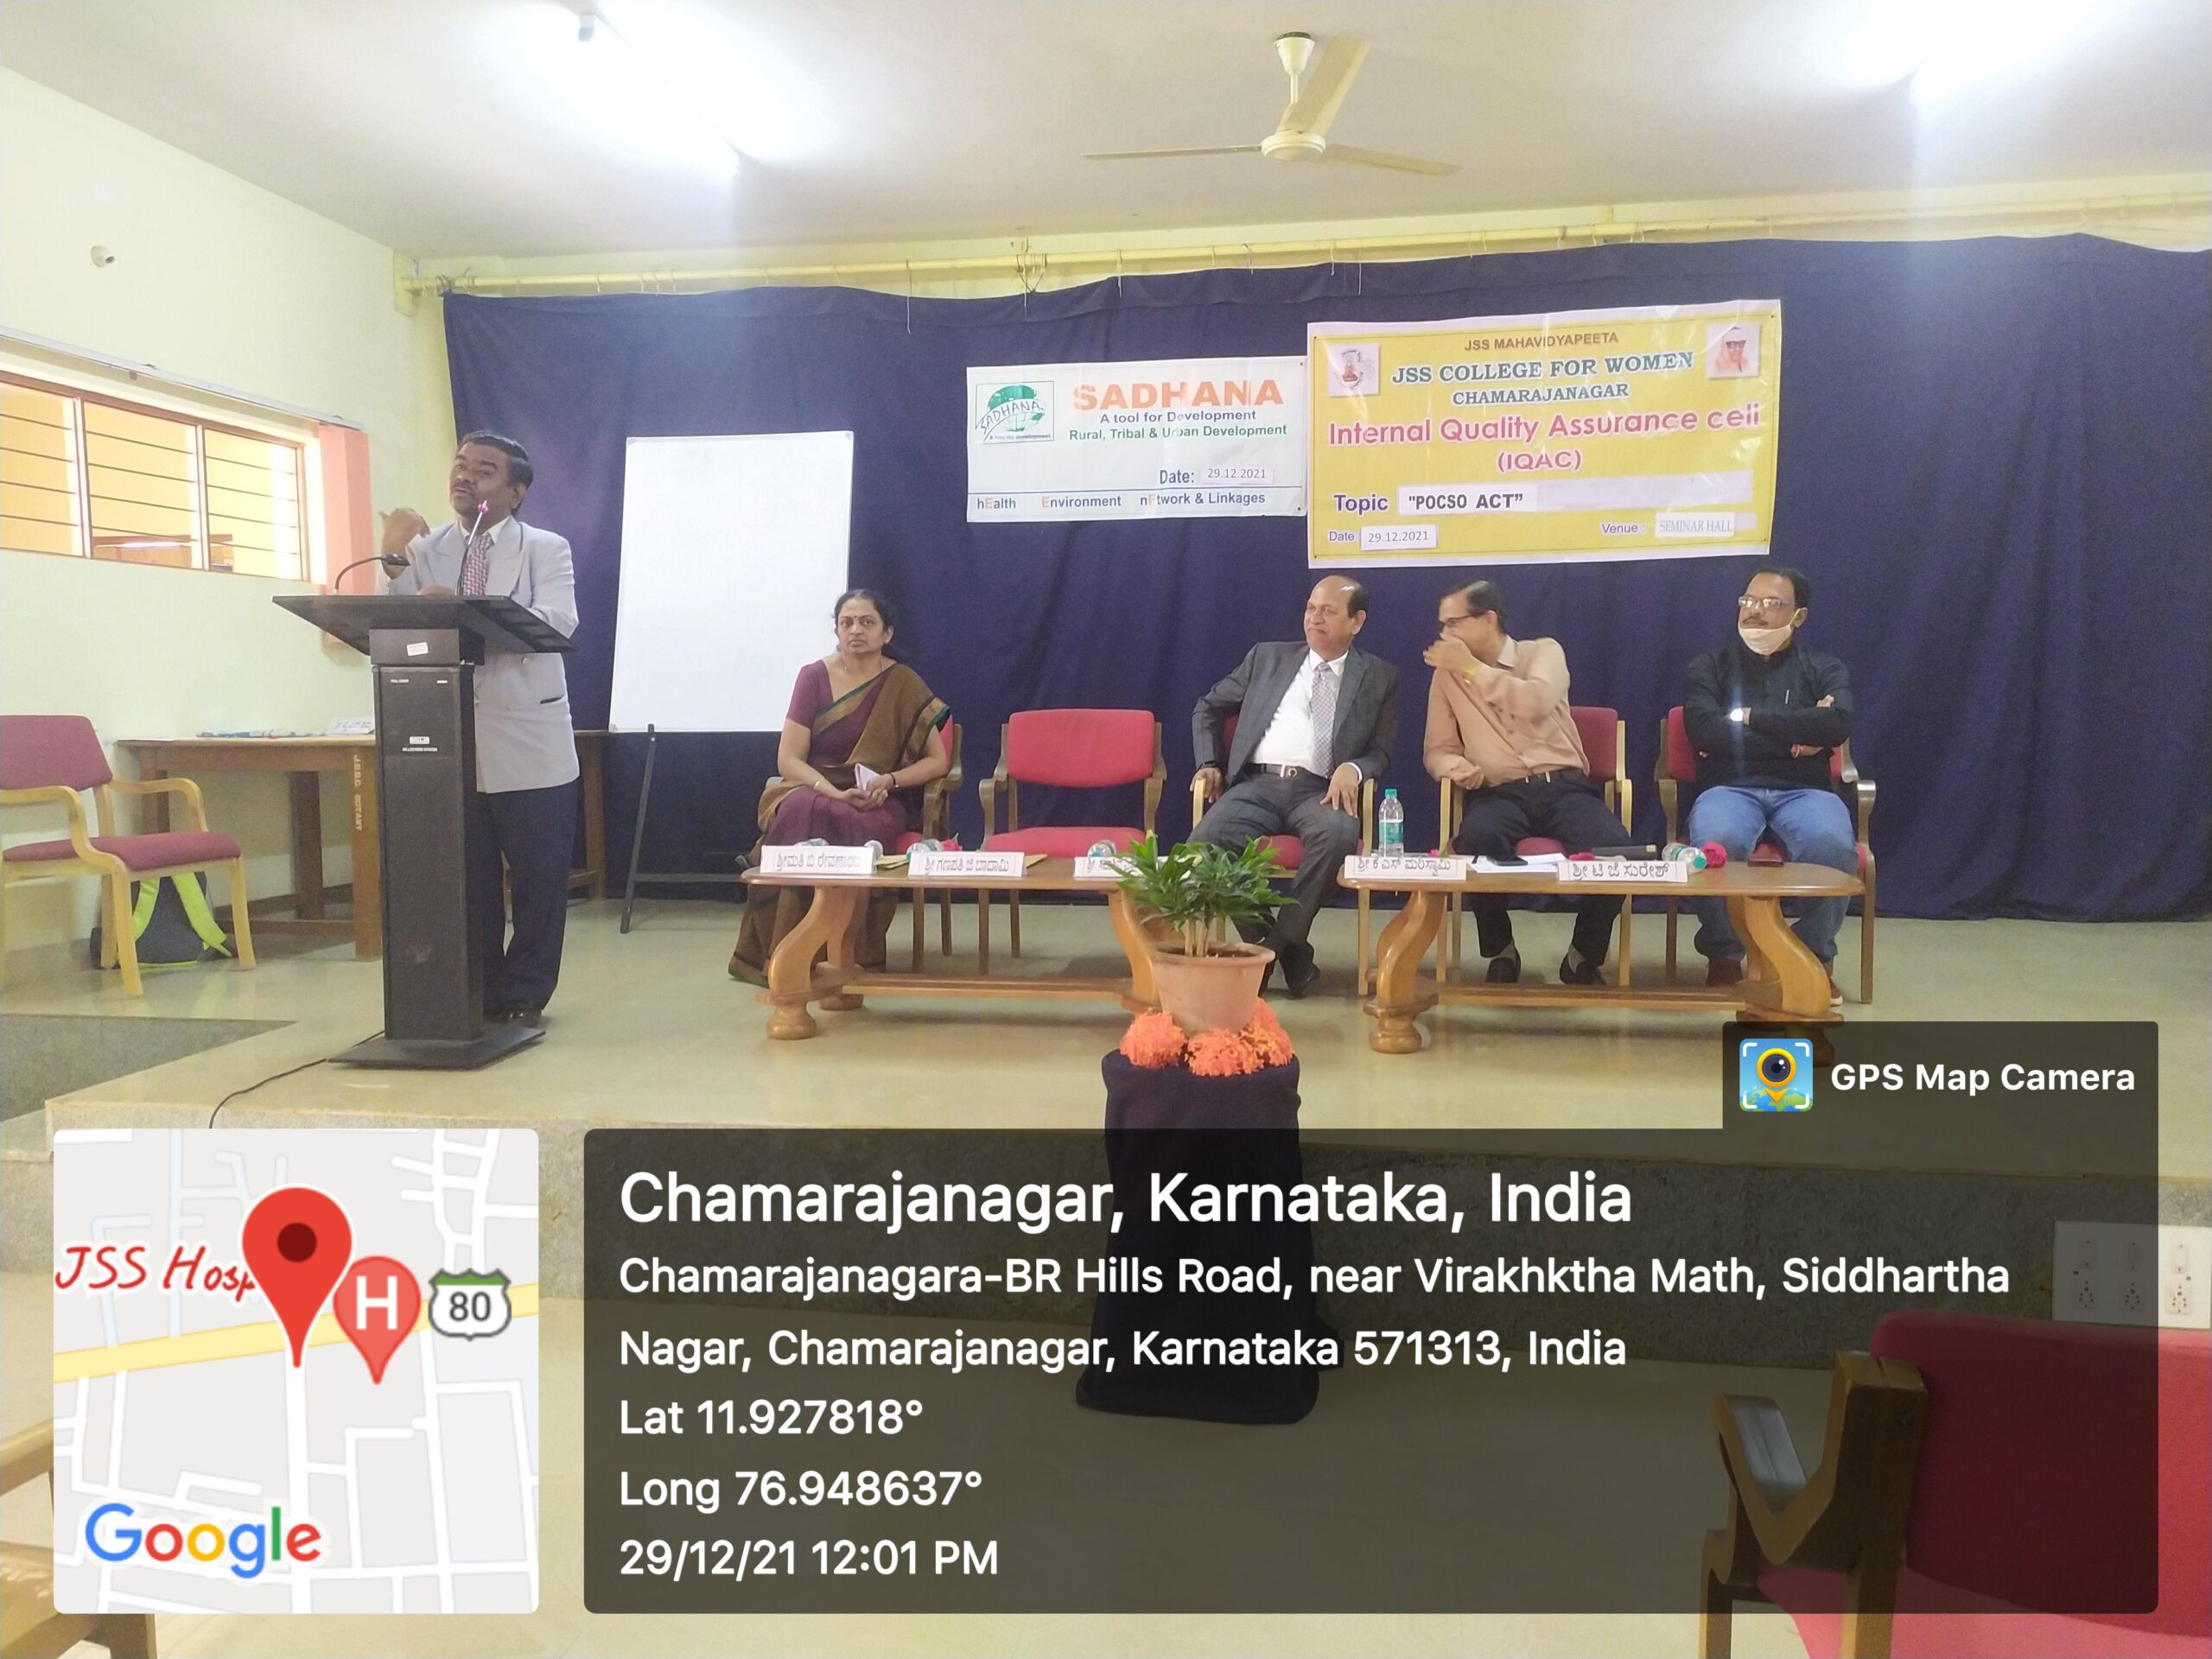 Special Lecture Programme on “POCSO ACT ” organized by IQAC in association with Sadhana NGO Chamarajanagar. Resource Person Sri Sadashiva S. Sulthanpuri Honourable Chief President and District Judge, District Legal Services Authority, Chamarajanagar District.